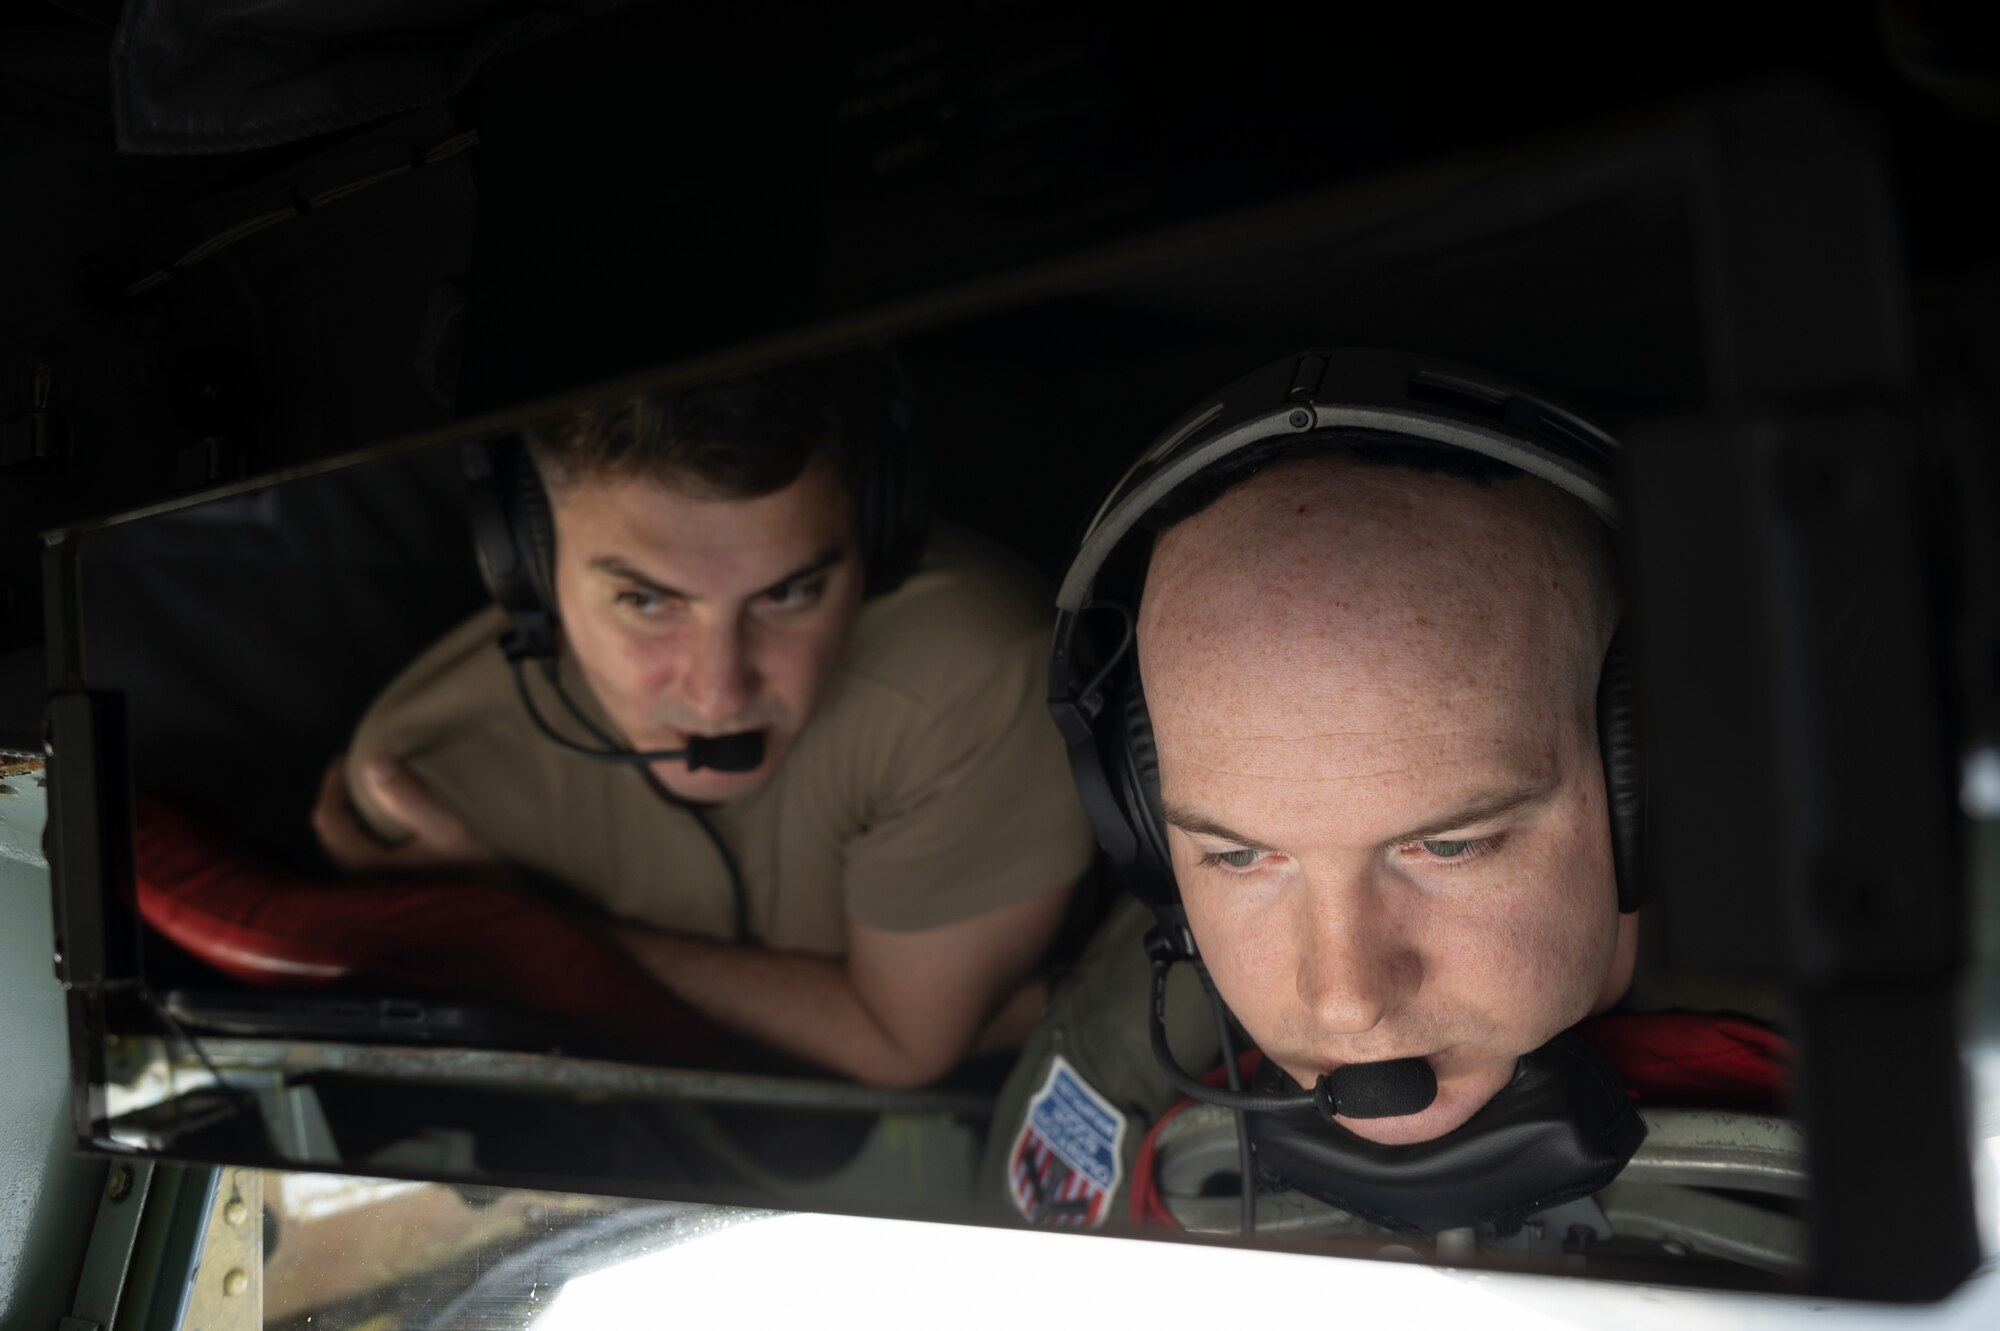 Tech Sgt. Lucas Balcarce, 909th Air Refueling Squadron boom operator, observes as SSgt. Andrew Chase, 909th ARS boom operator, delivers fuel to an F-15C Eagle during a flight over the Pacific Ocean in support of exercise Keen Sword 23, Nov. 17, 2022. Joint and bilateral cooperation and collaboration enhance regional security, stability, and prosperity. (U.S. Air Force photo by Senior Airman Jessi Roth)